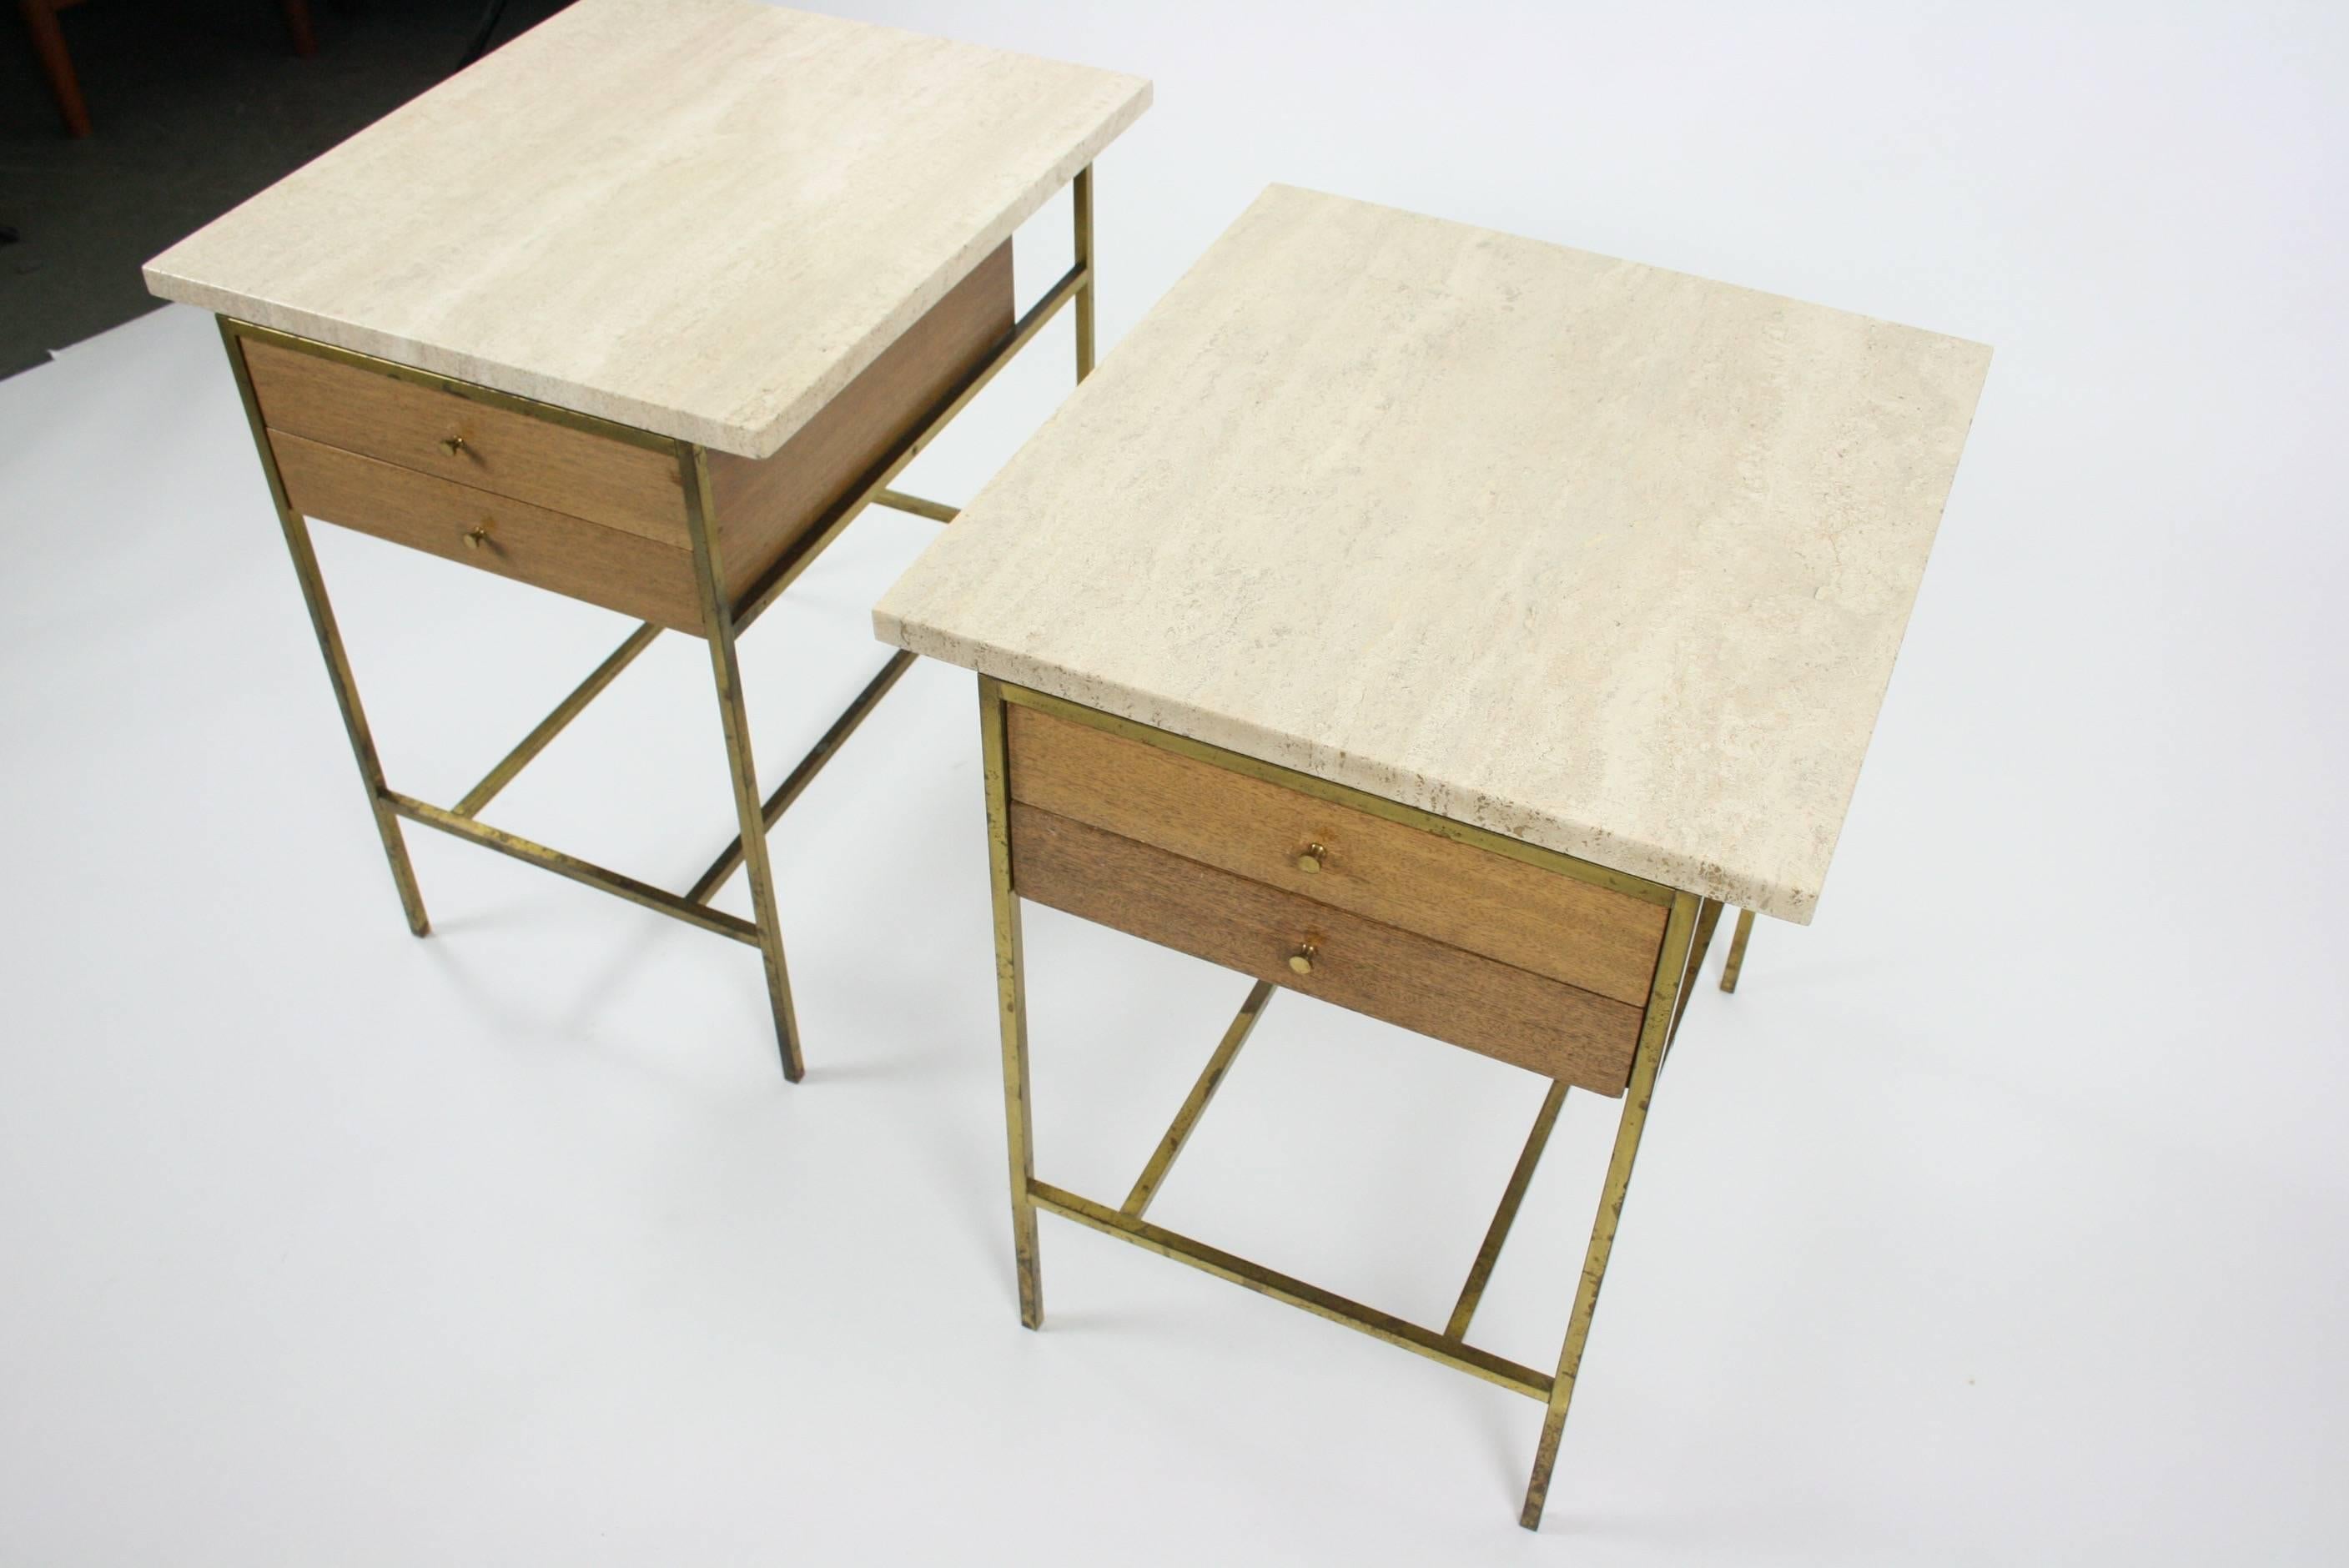 American Pair of Two-Drawer Nightstands by Paul McCobb for Calvin Group